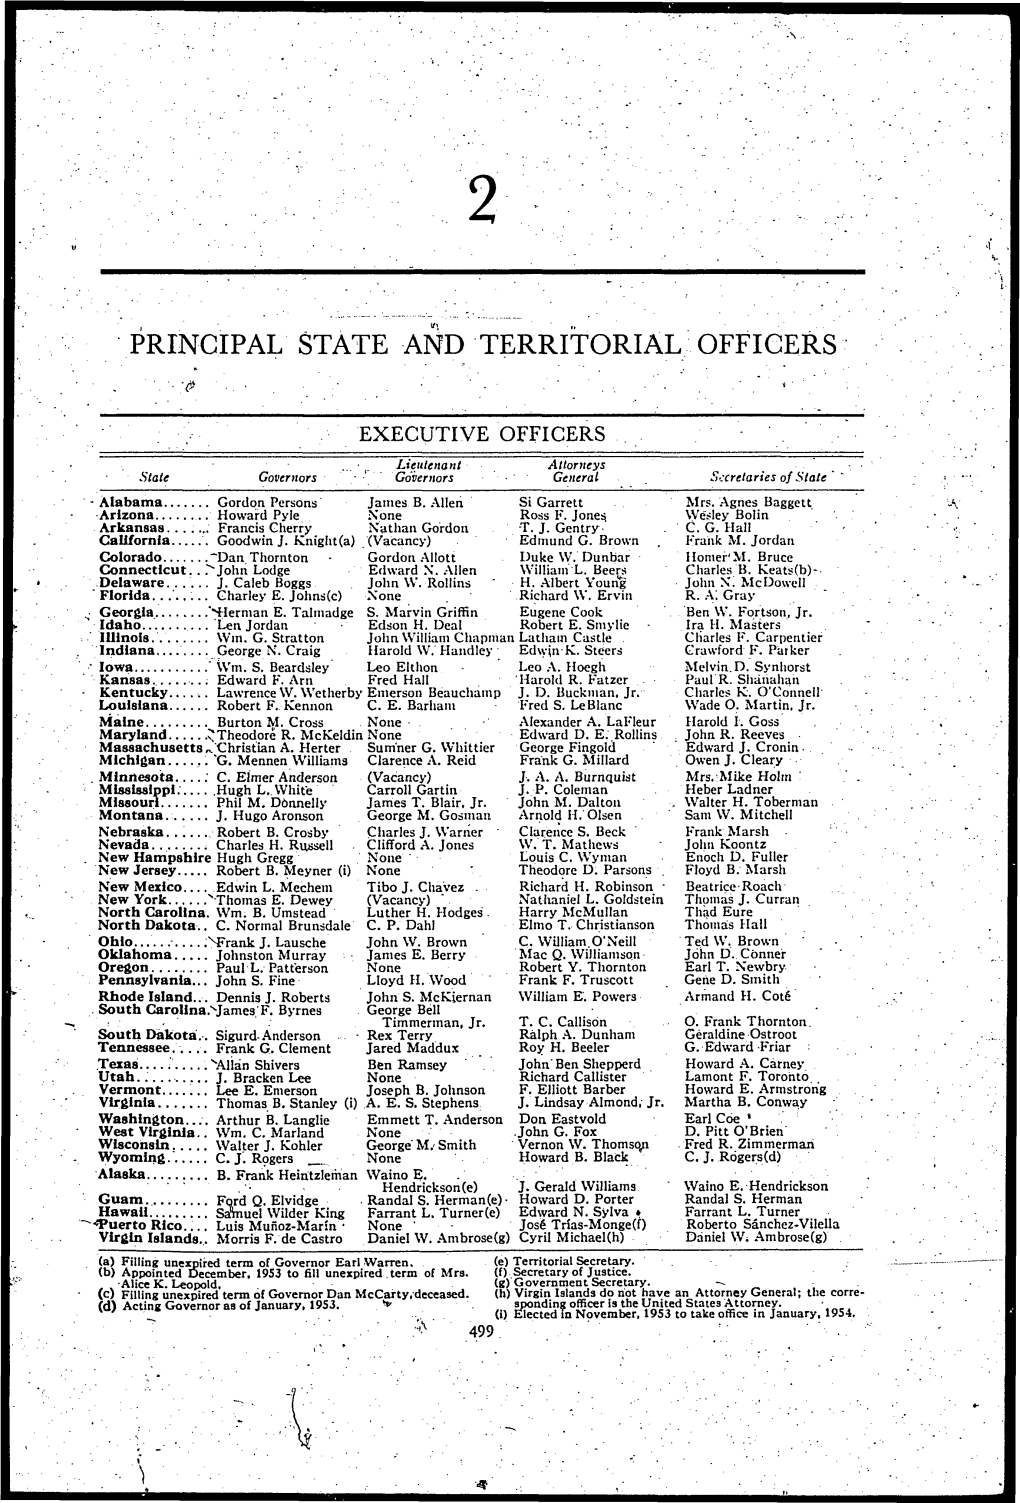 Principal State and Territorial Officers